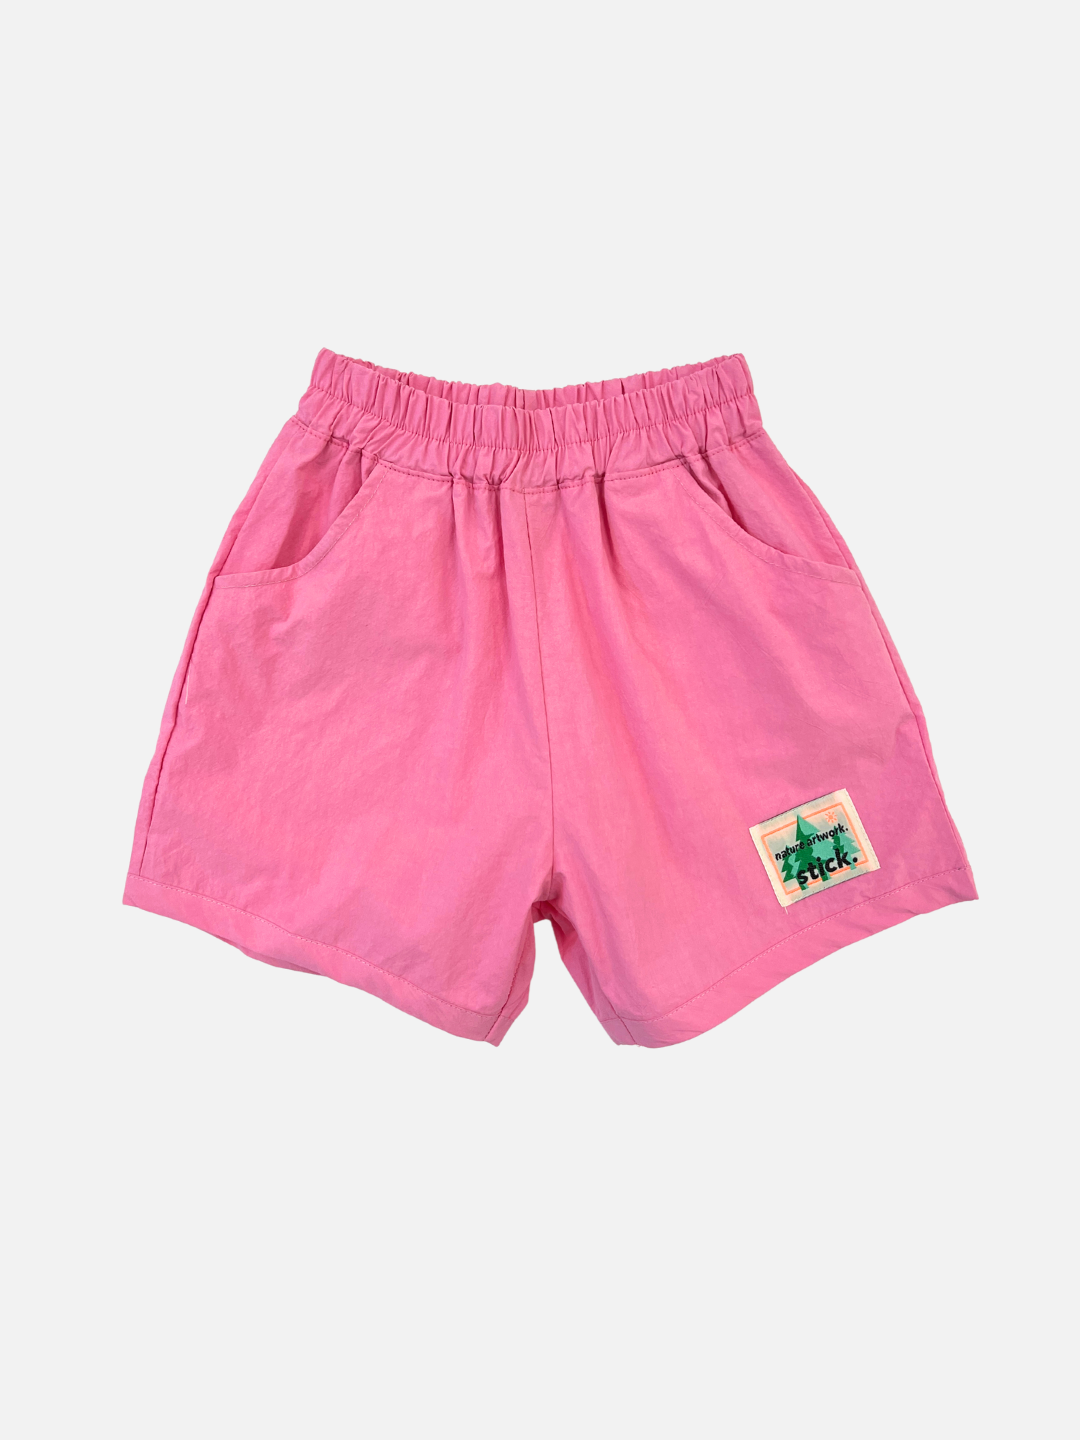 Front view of kids' pink shorts.